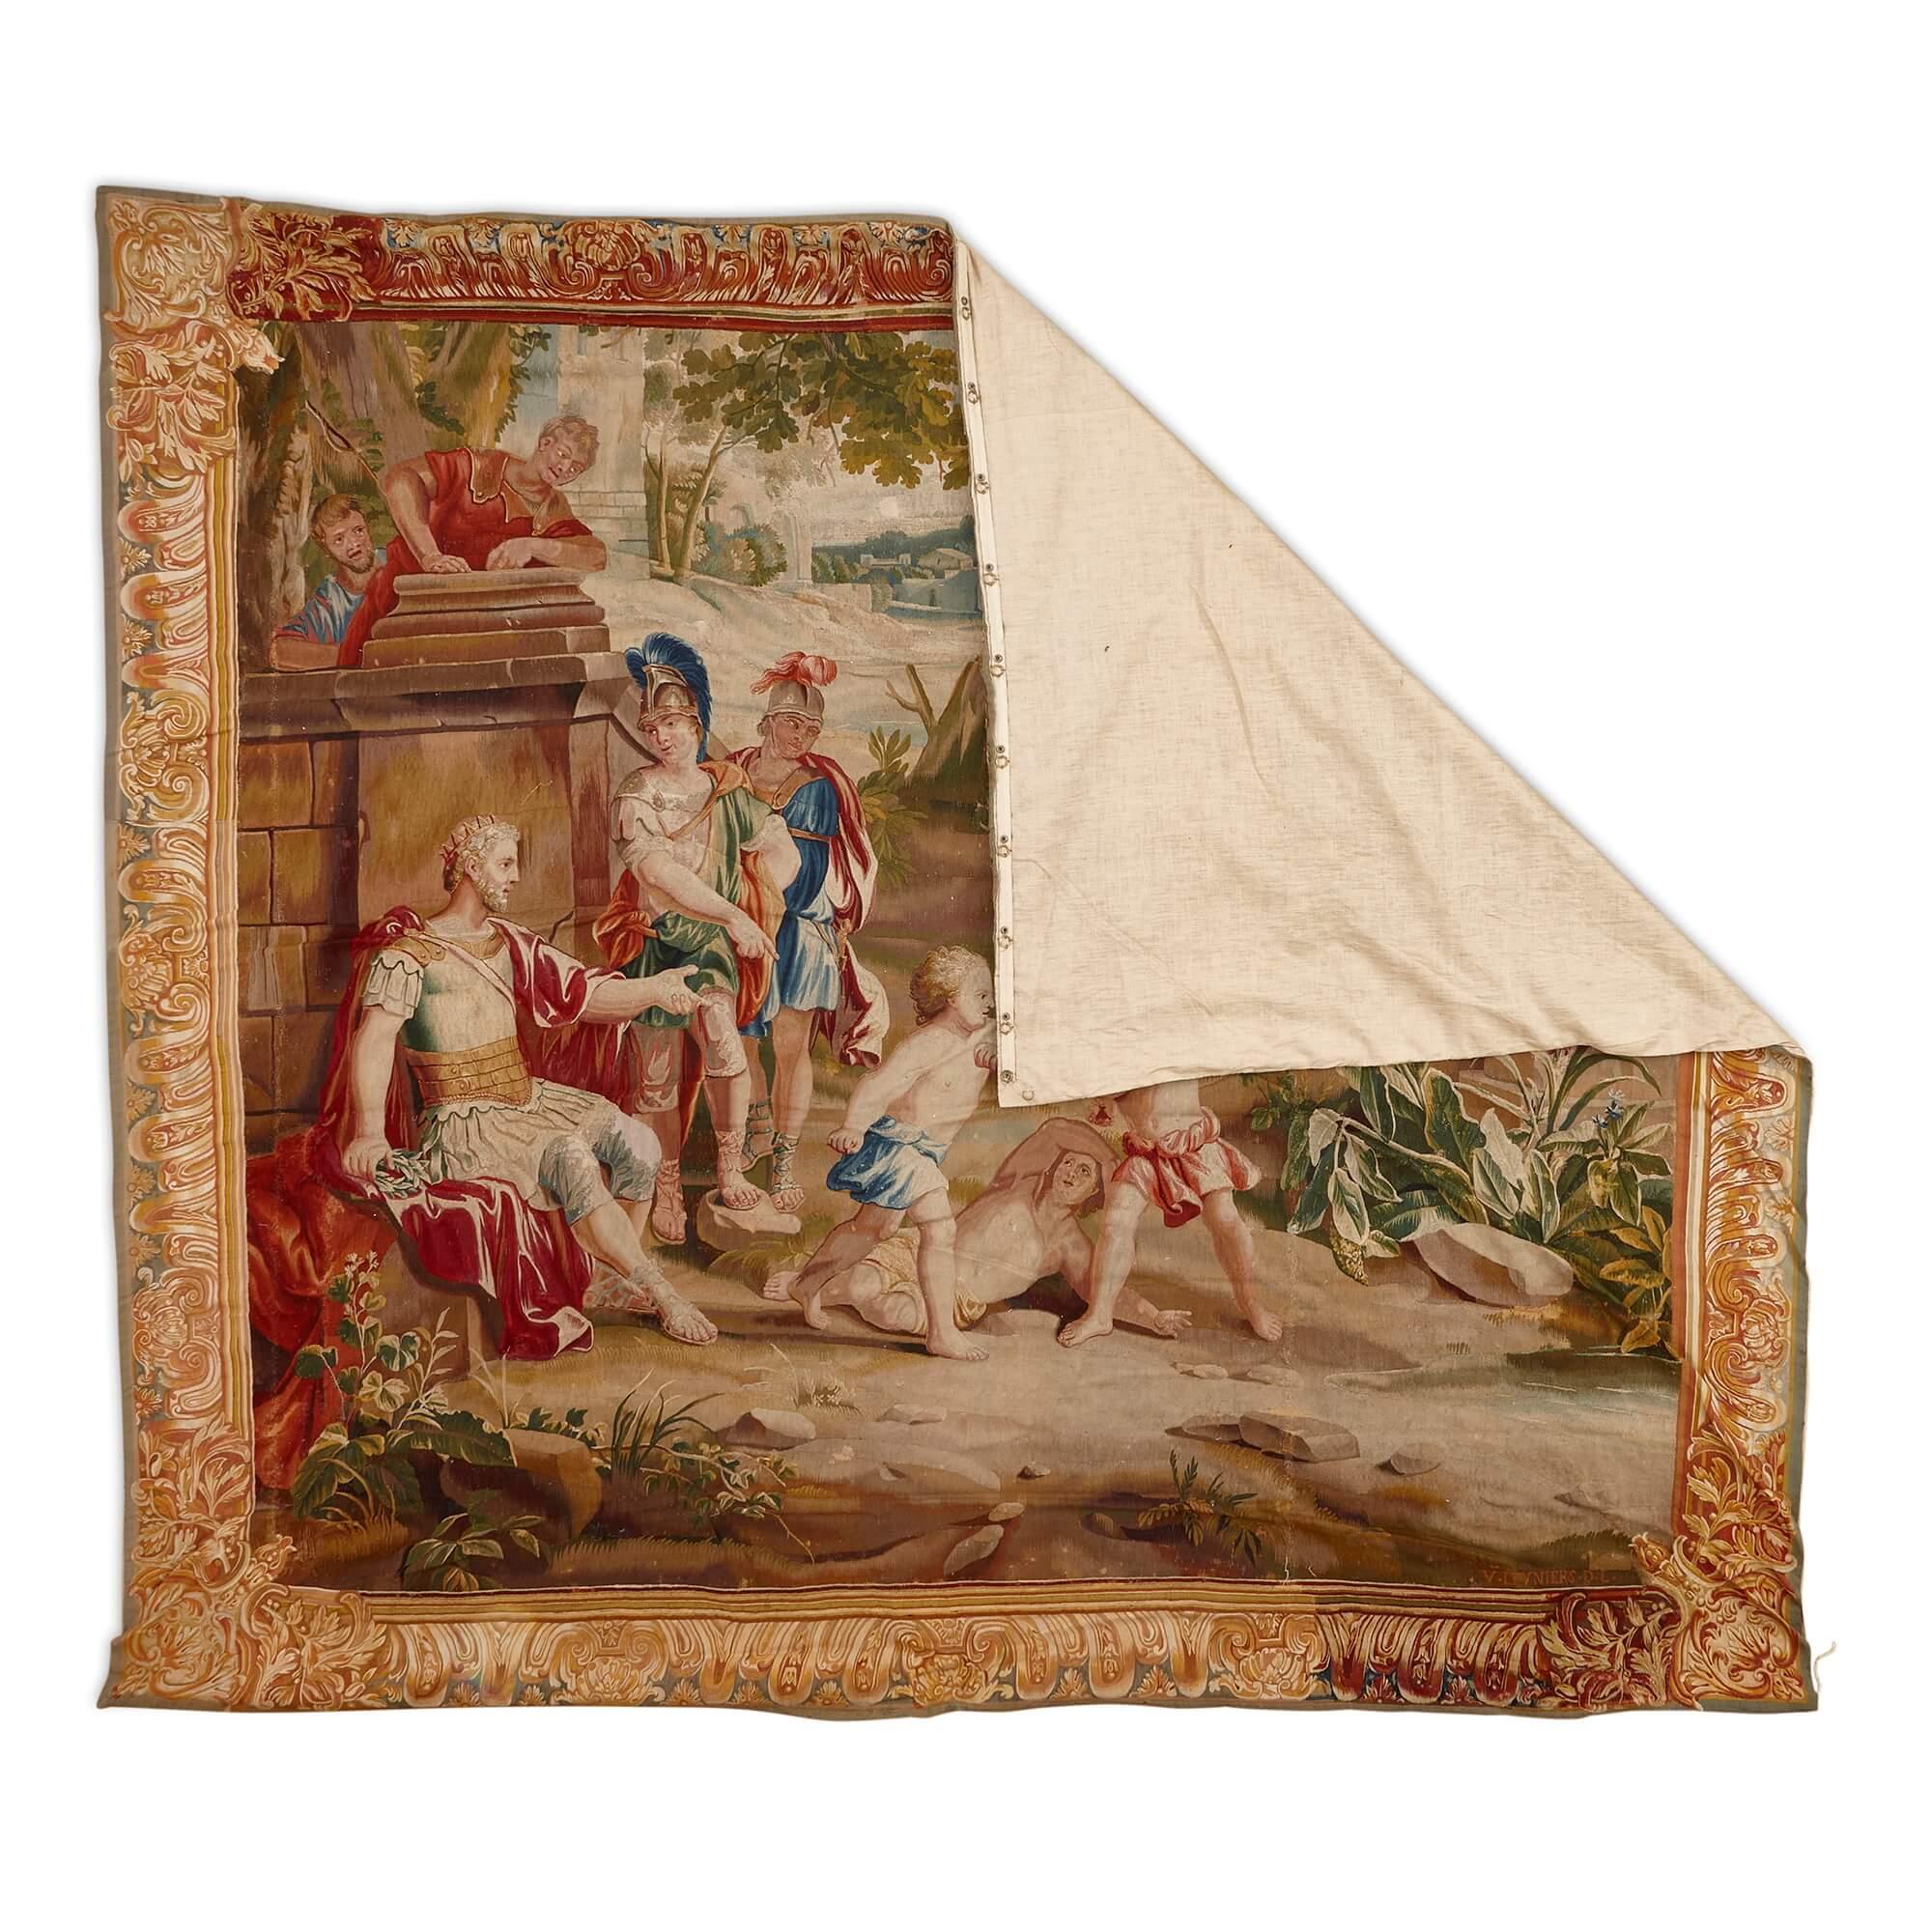 Rare 18th century wool and silk tapestry by Leyniers 
Belgian, 18th Century 
Length 247cm, width 283cm

Beautifully executed and vibrantly coloured, this large tapestry was made in 18th century Brussels by Urbanus (1674-1747) and Daniel III